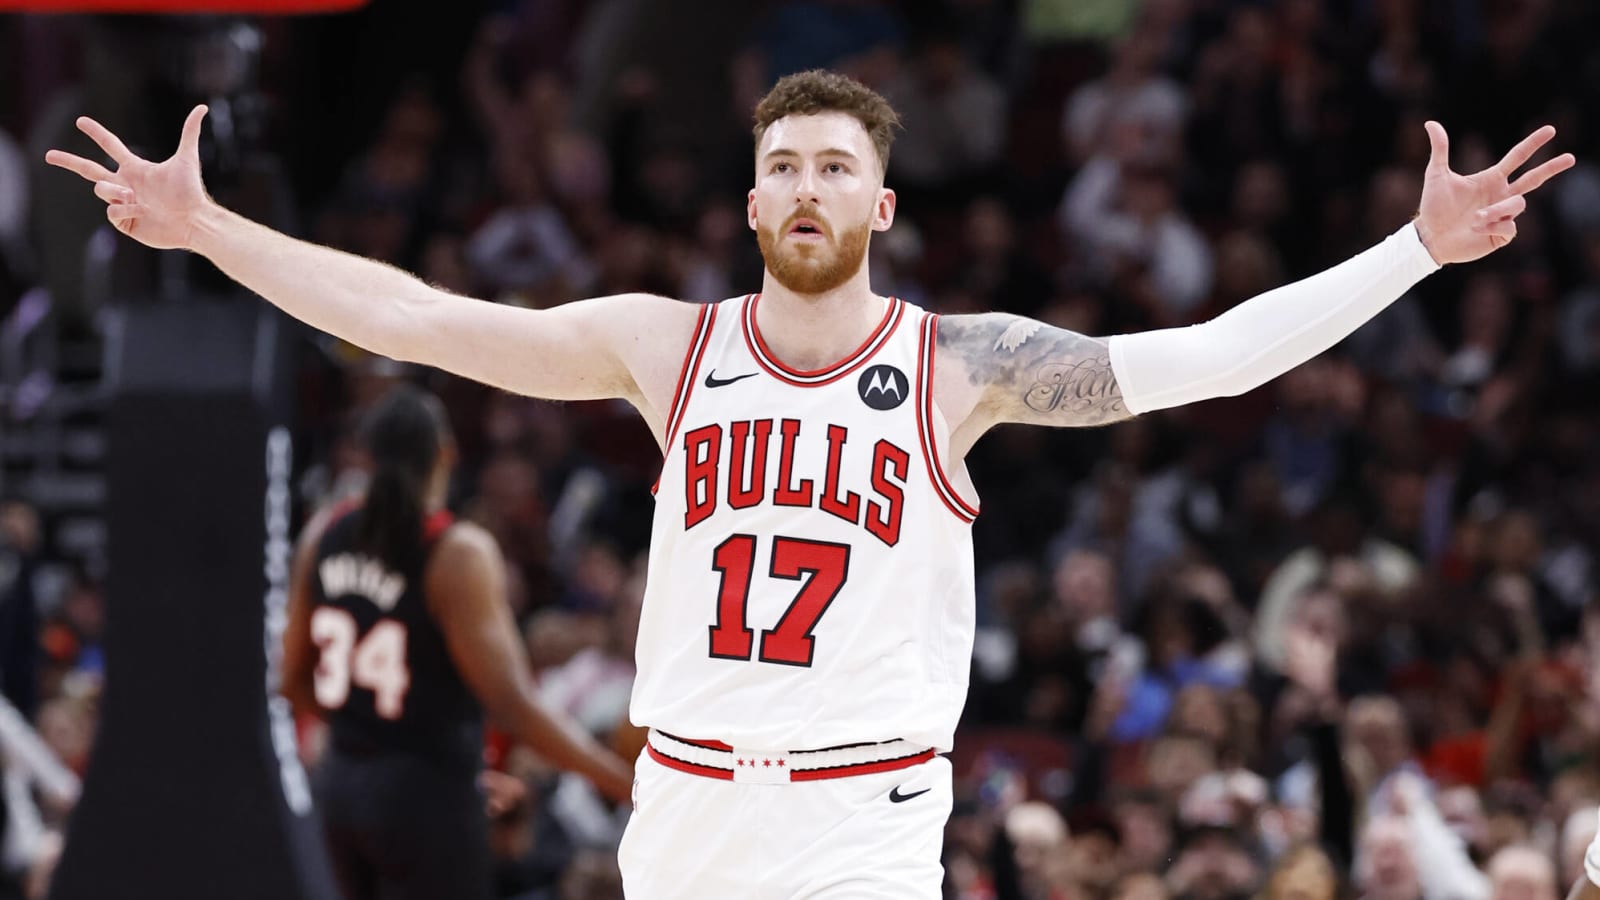 Bulls rookie ruled out for postseason